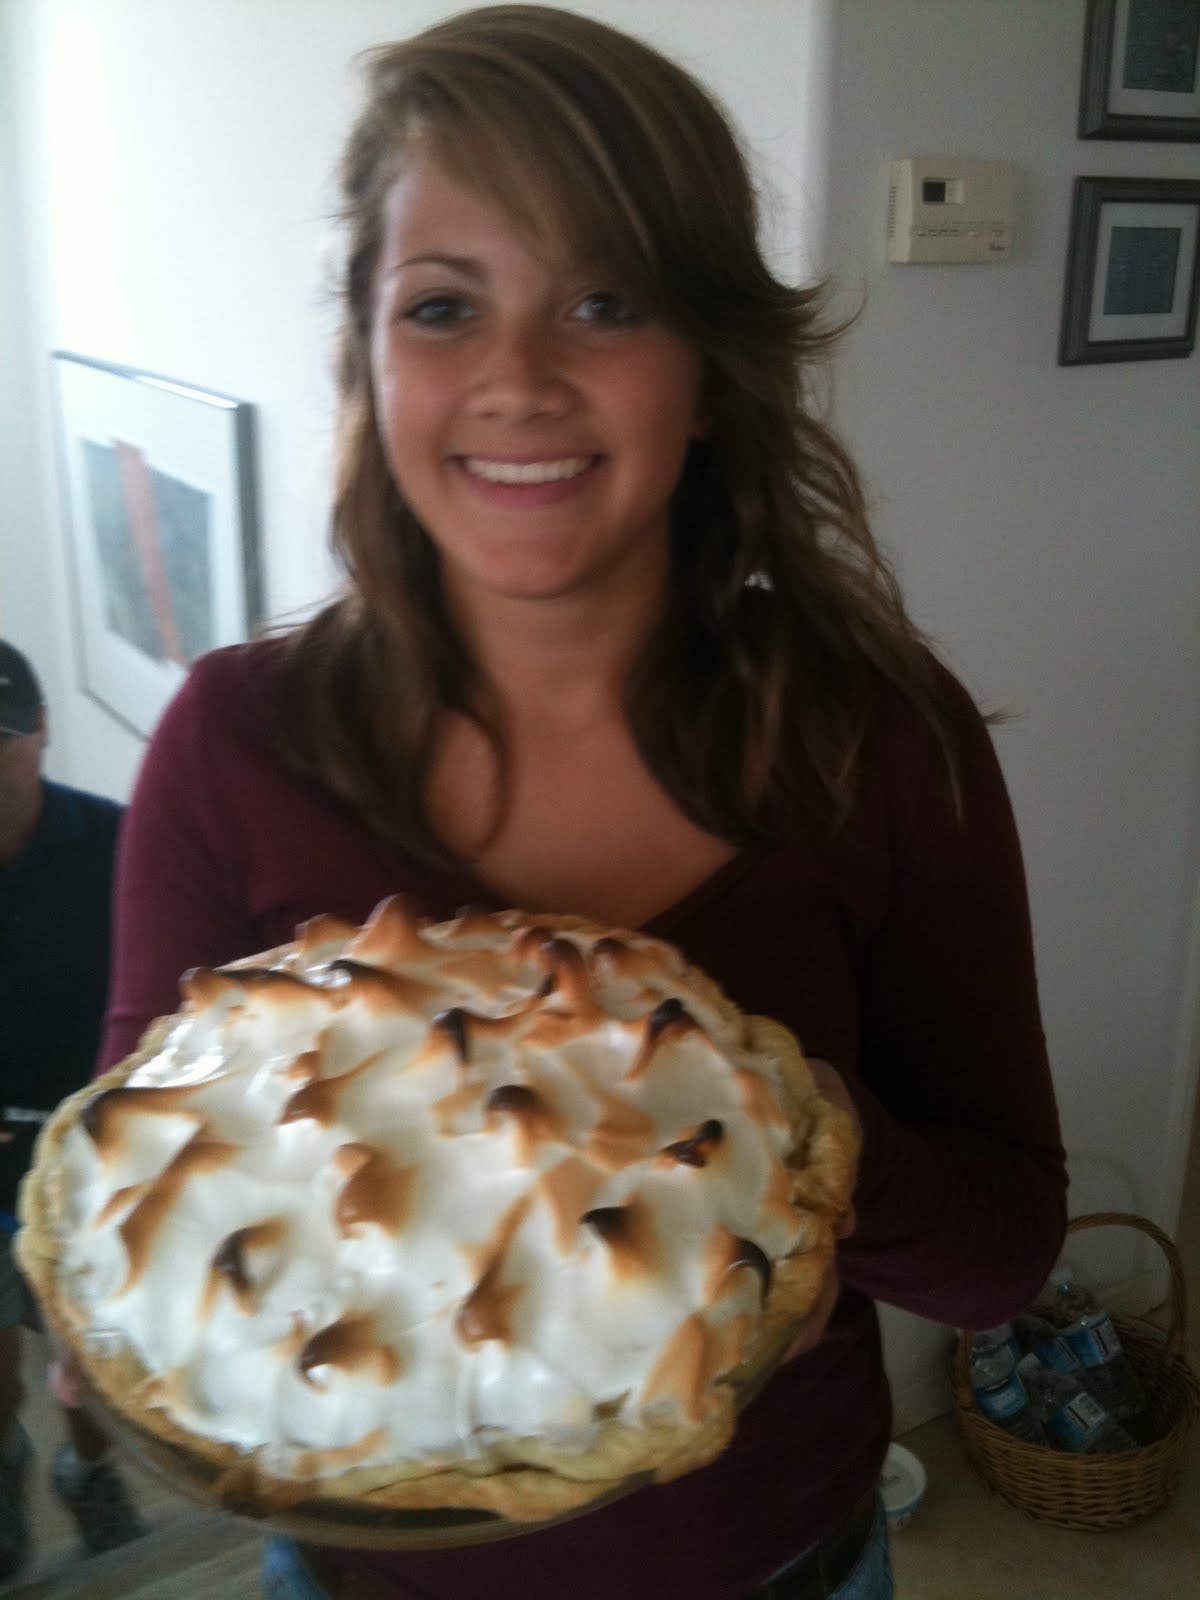 The World Needs More Pie My 16 Year Old Niece Learns To Make Pies 